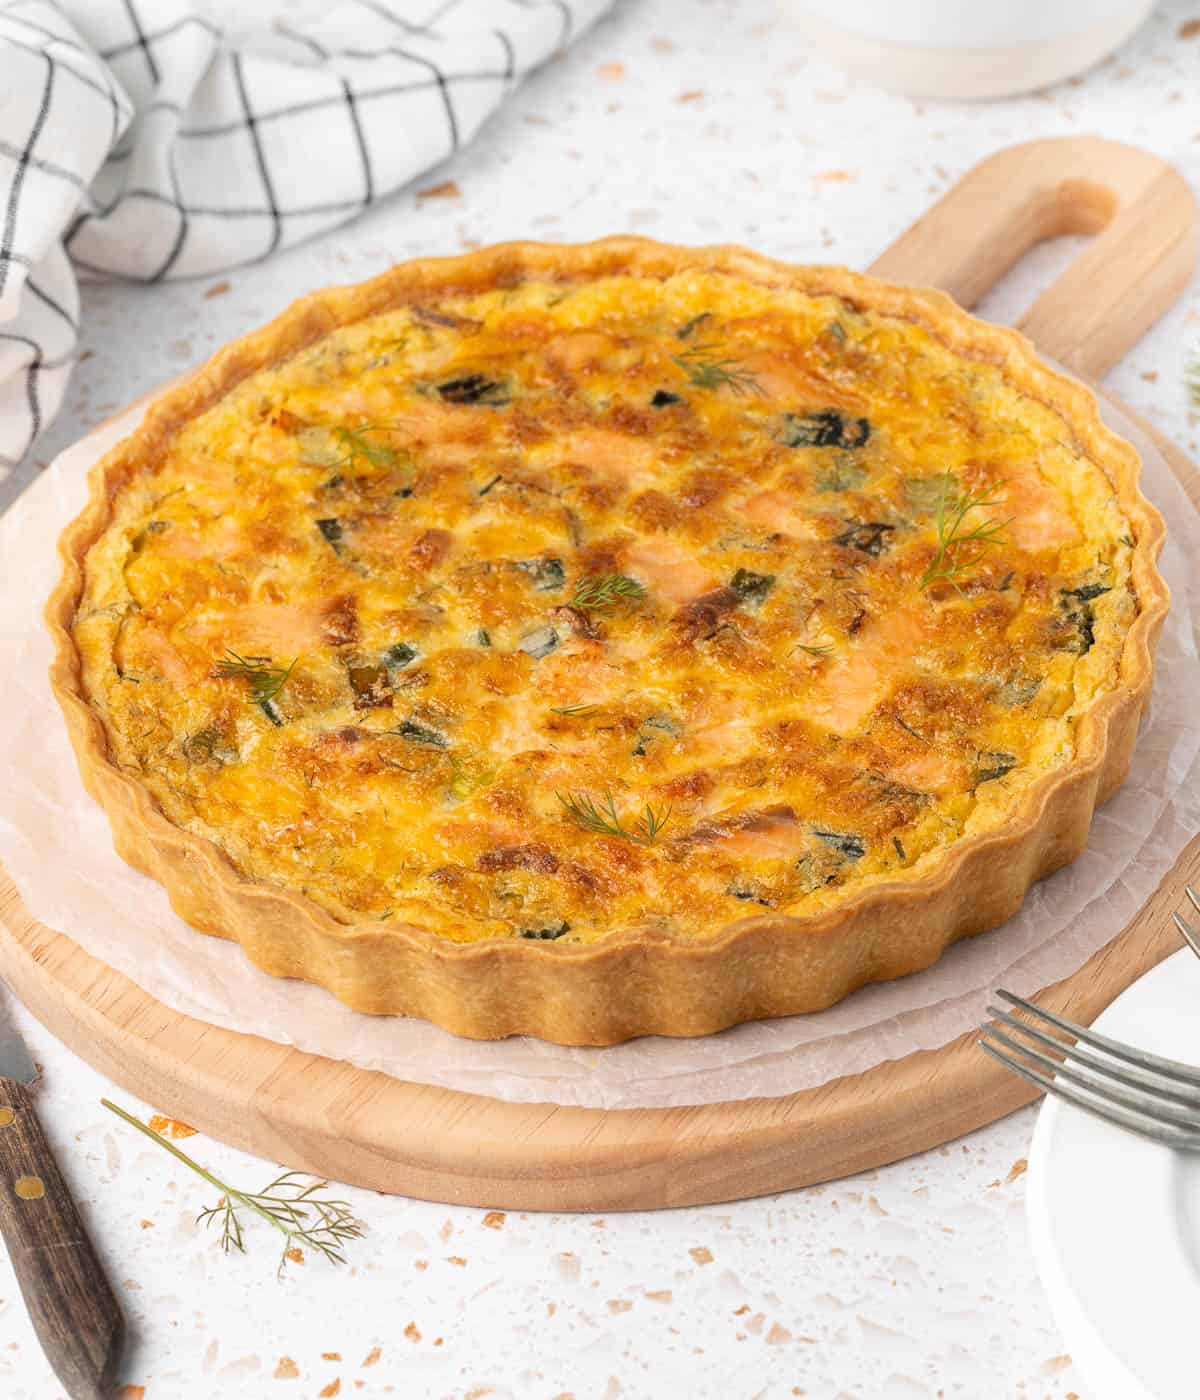 Baked quiche on a round wooden serving board.